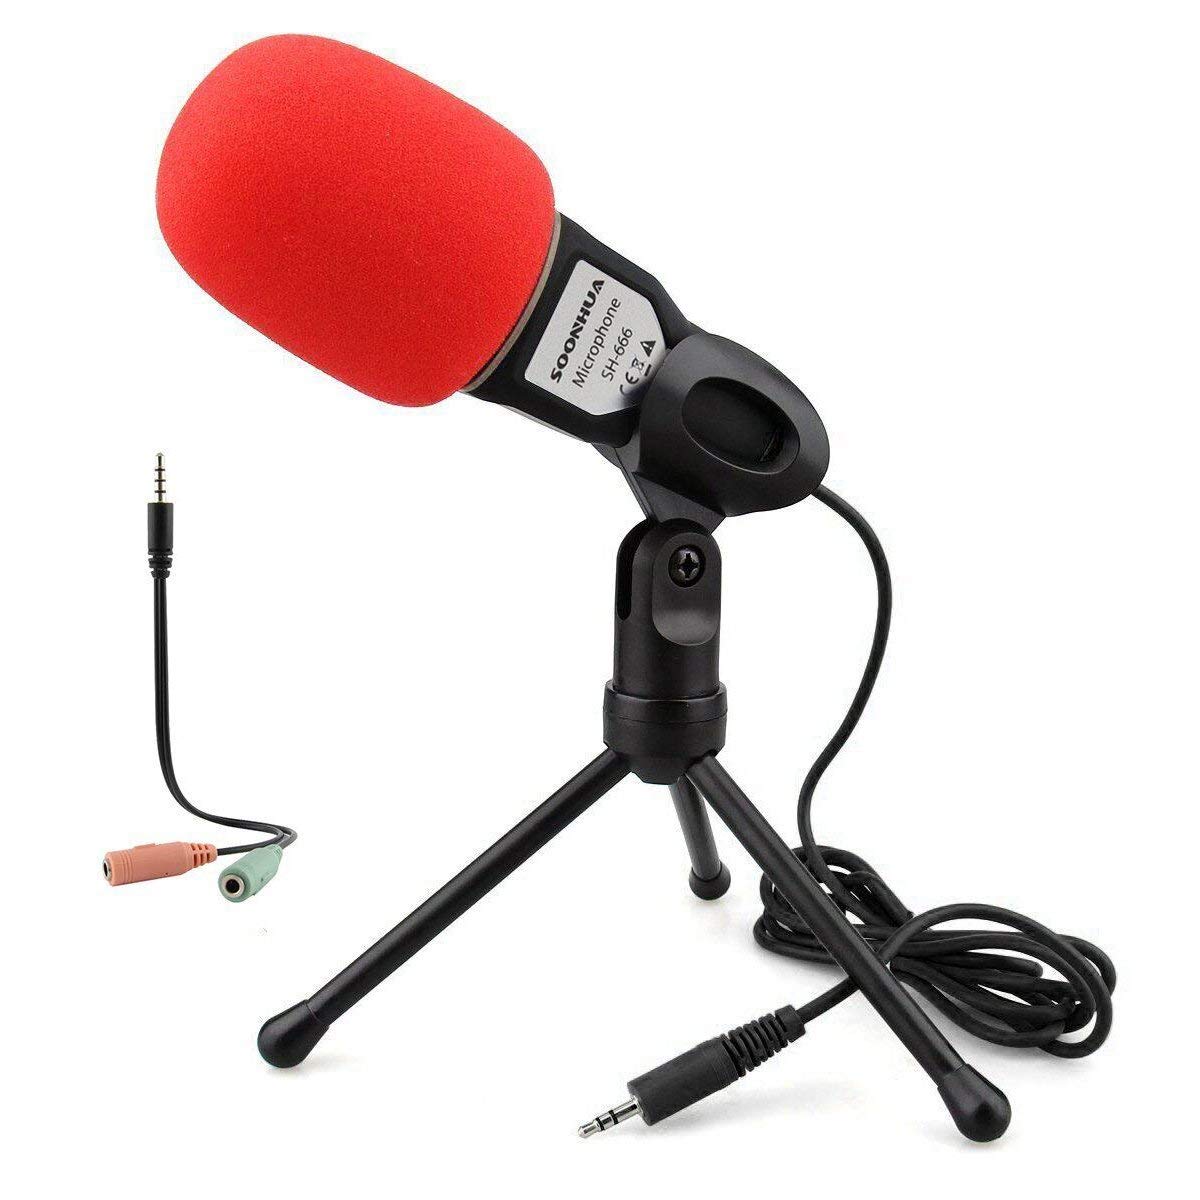 Condenser Microphone,Computer Microphone,SOONHUA 3.5MM Plug&Play Omnidirectional Mic with Desktop Stand for Gaming,YouTube Video,Recording Podcast,Studio,for PC,Laptop,Tablet,Phone